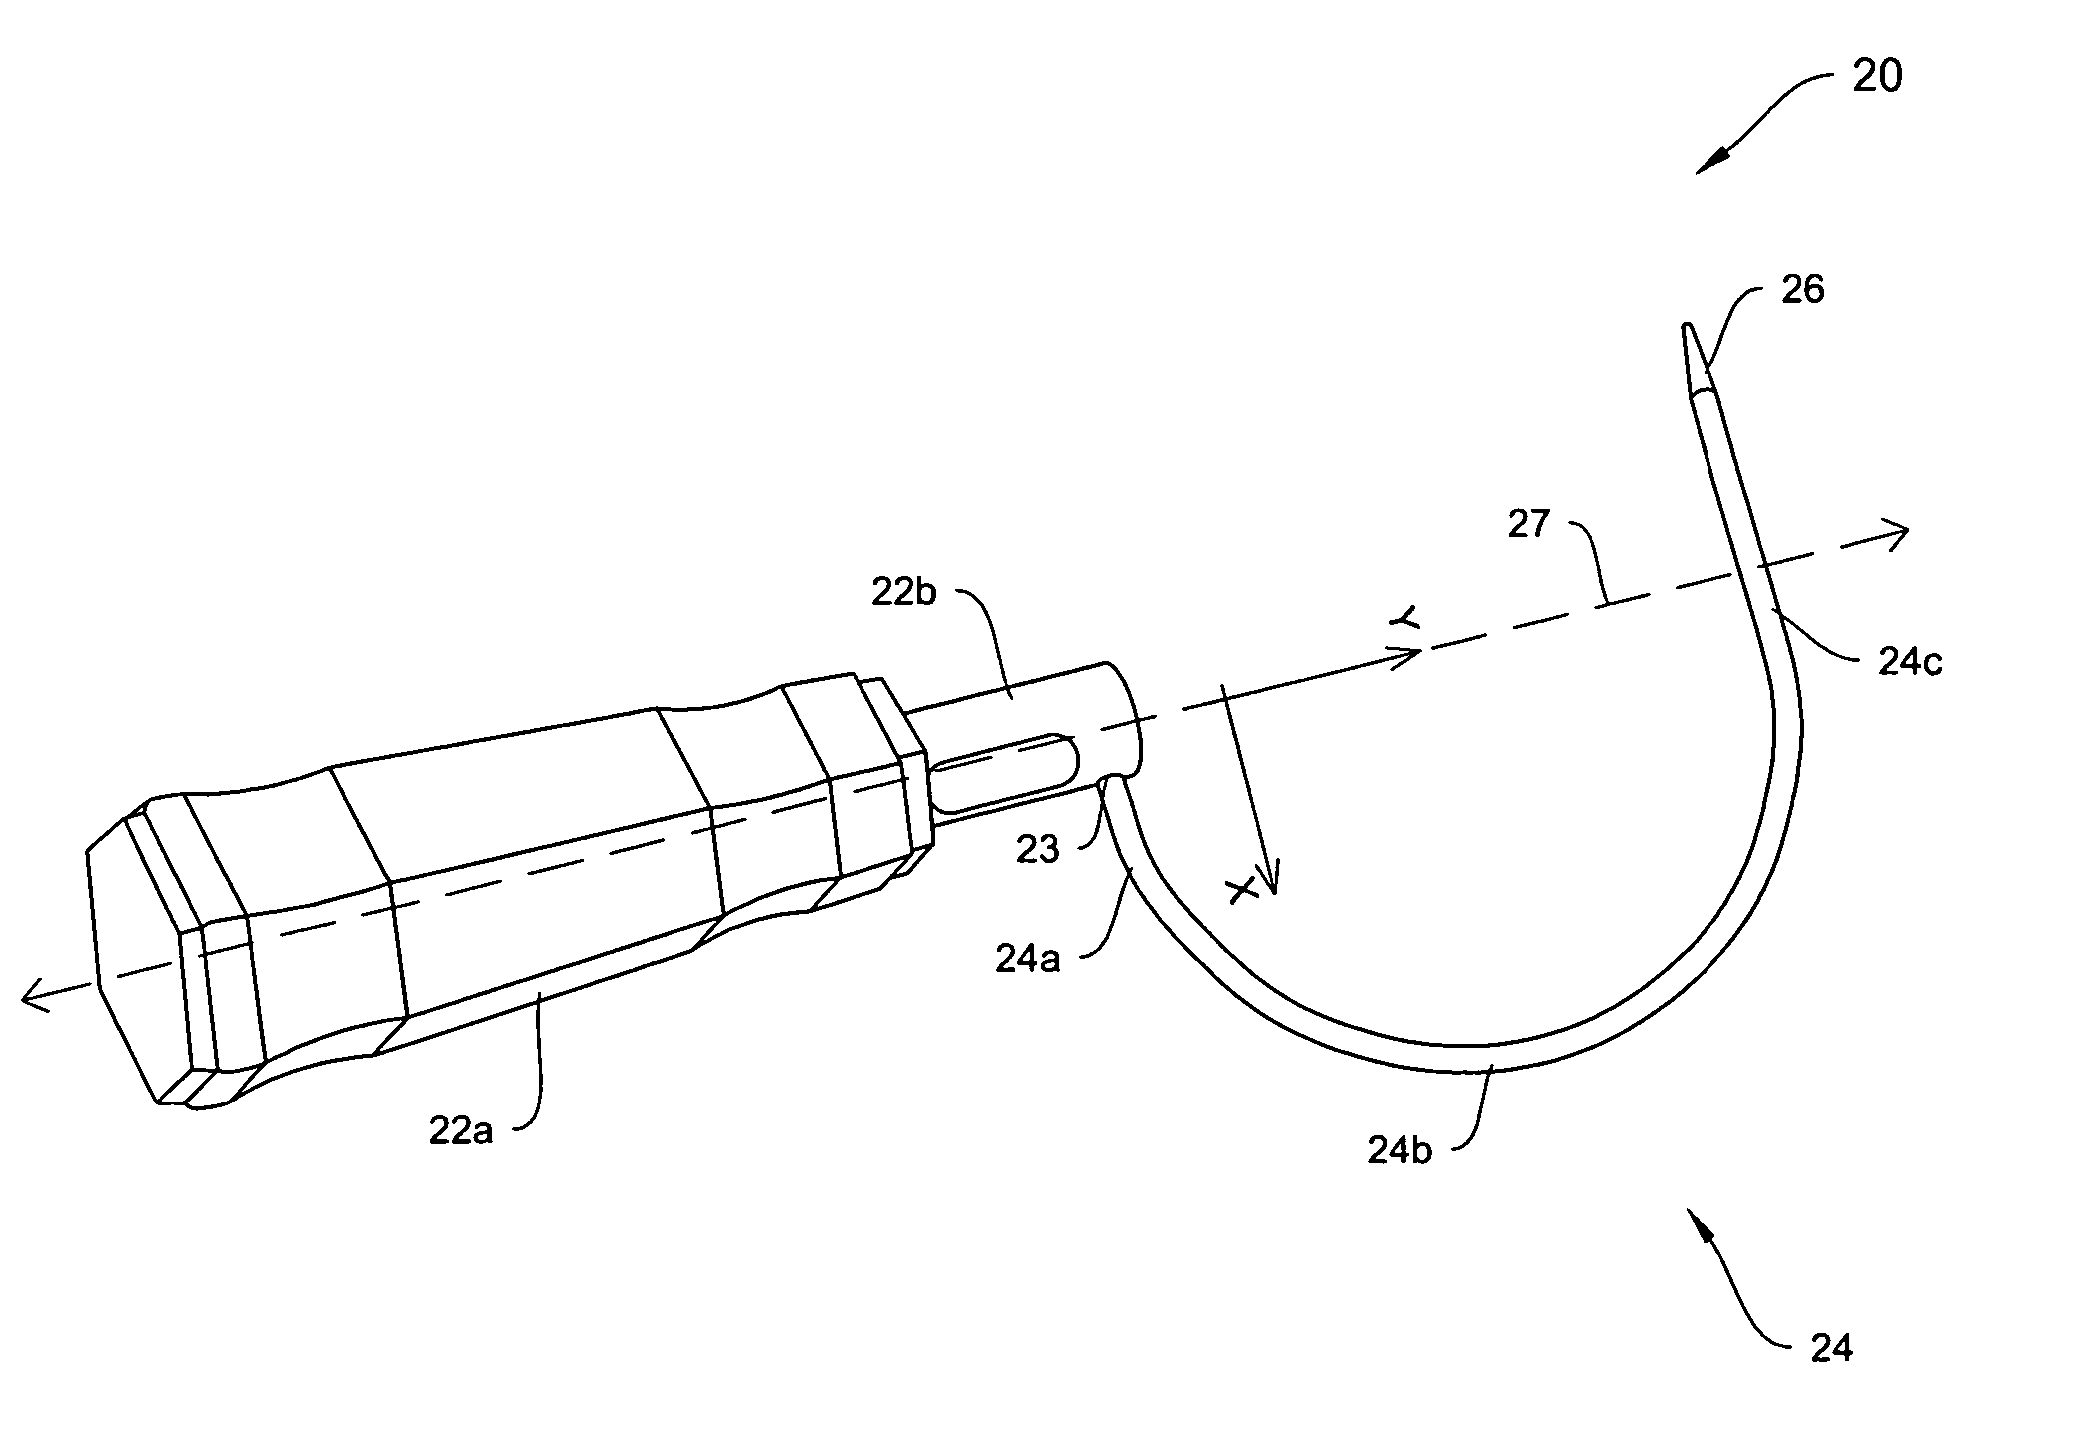 Systems and methods for delivering a medical implant to an anatomical location in a patient